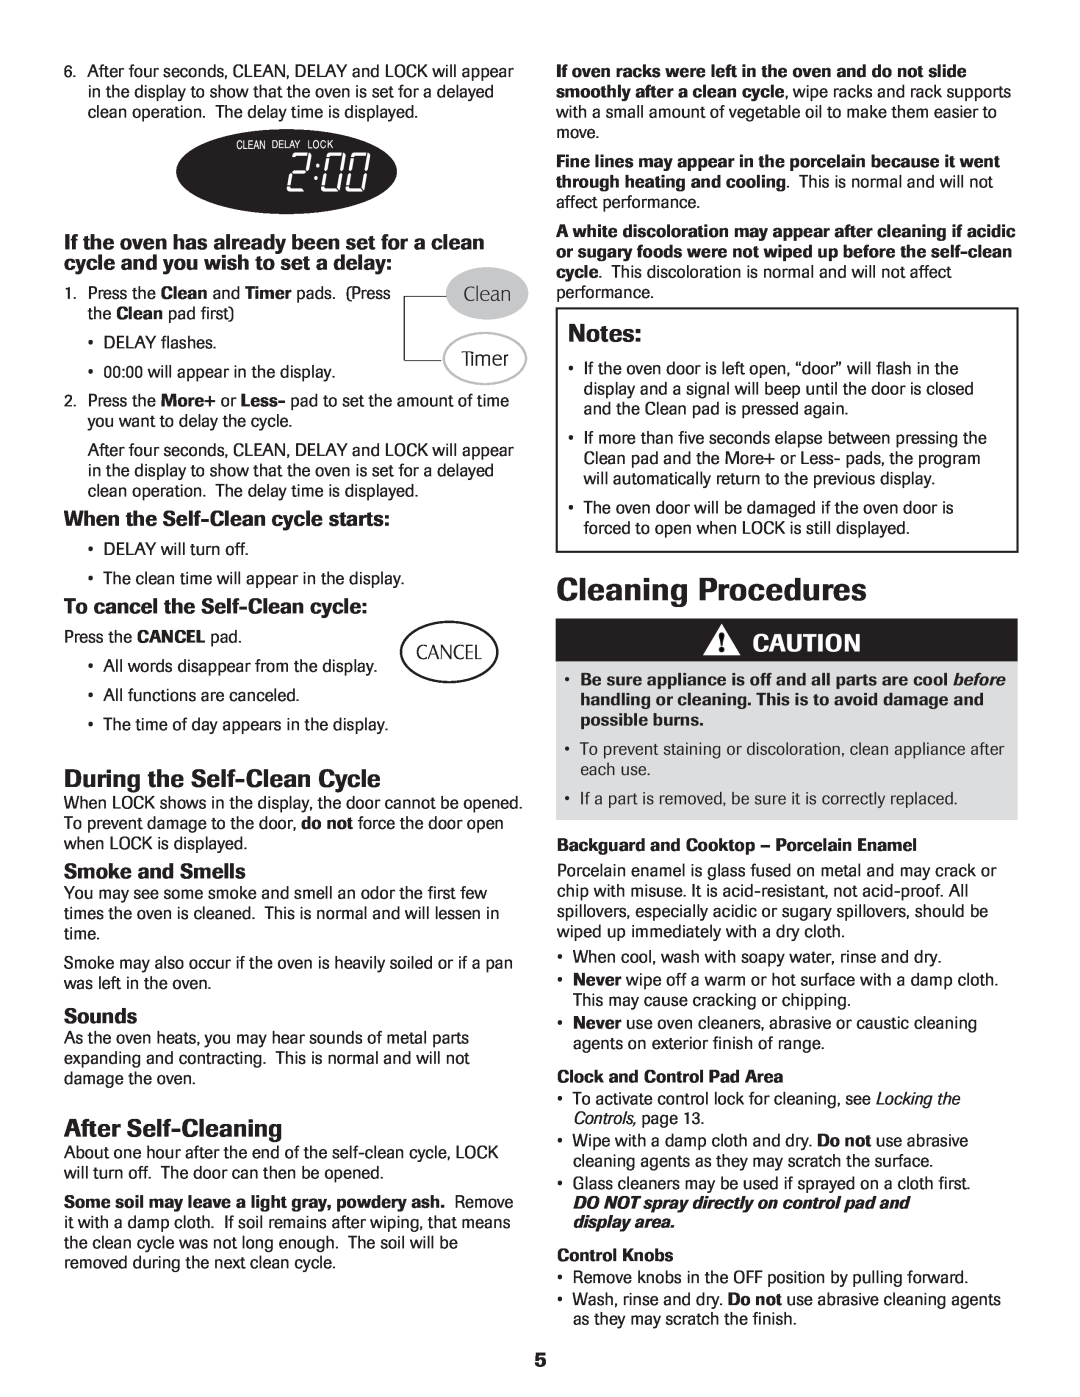 Maytag MER5775RAW Cleaning Procedures, During the Self-Clean Cycle, After Self-Cleaning, When the Self-Clean cycle starts 